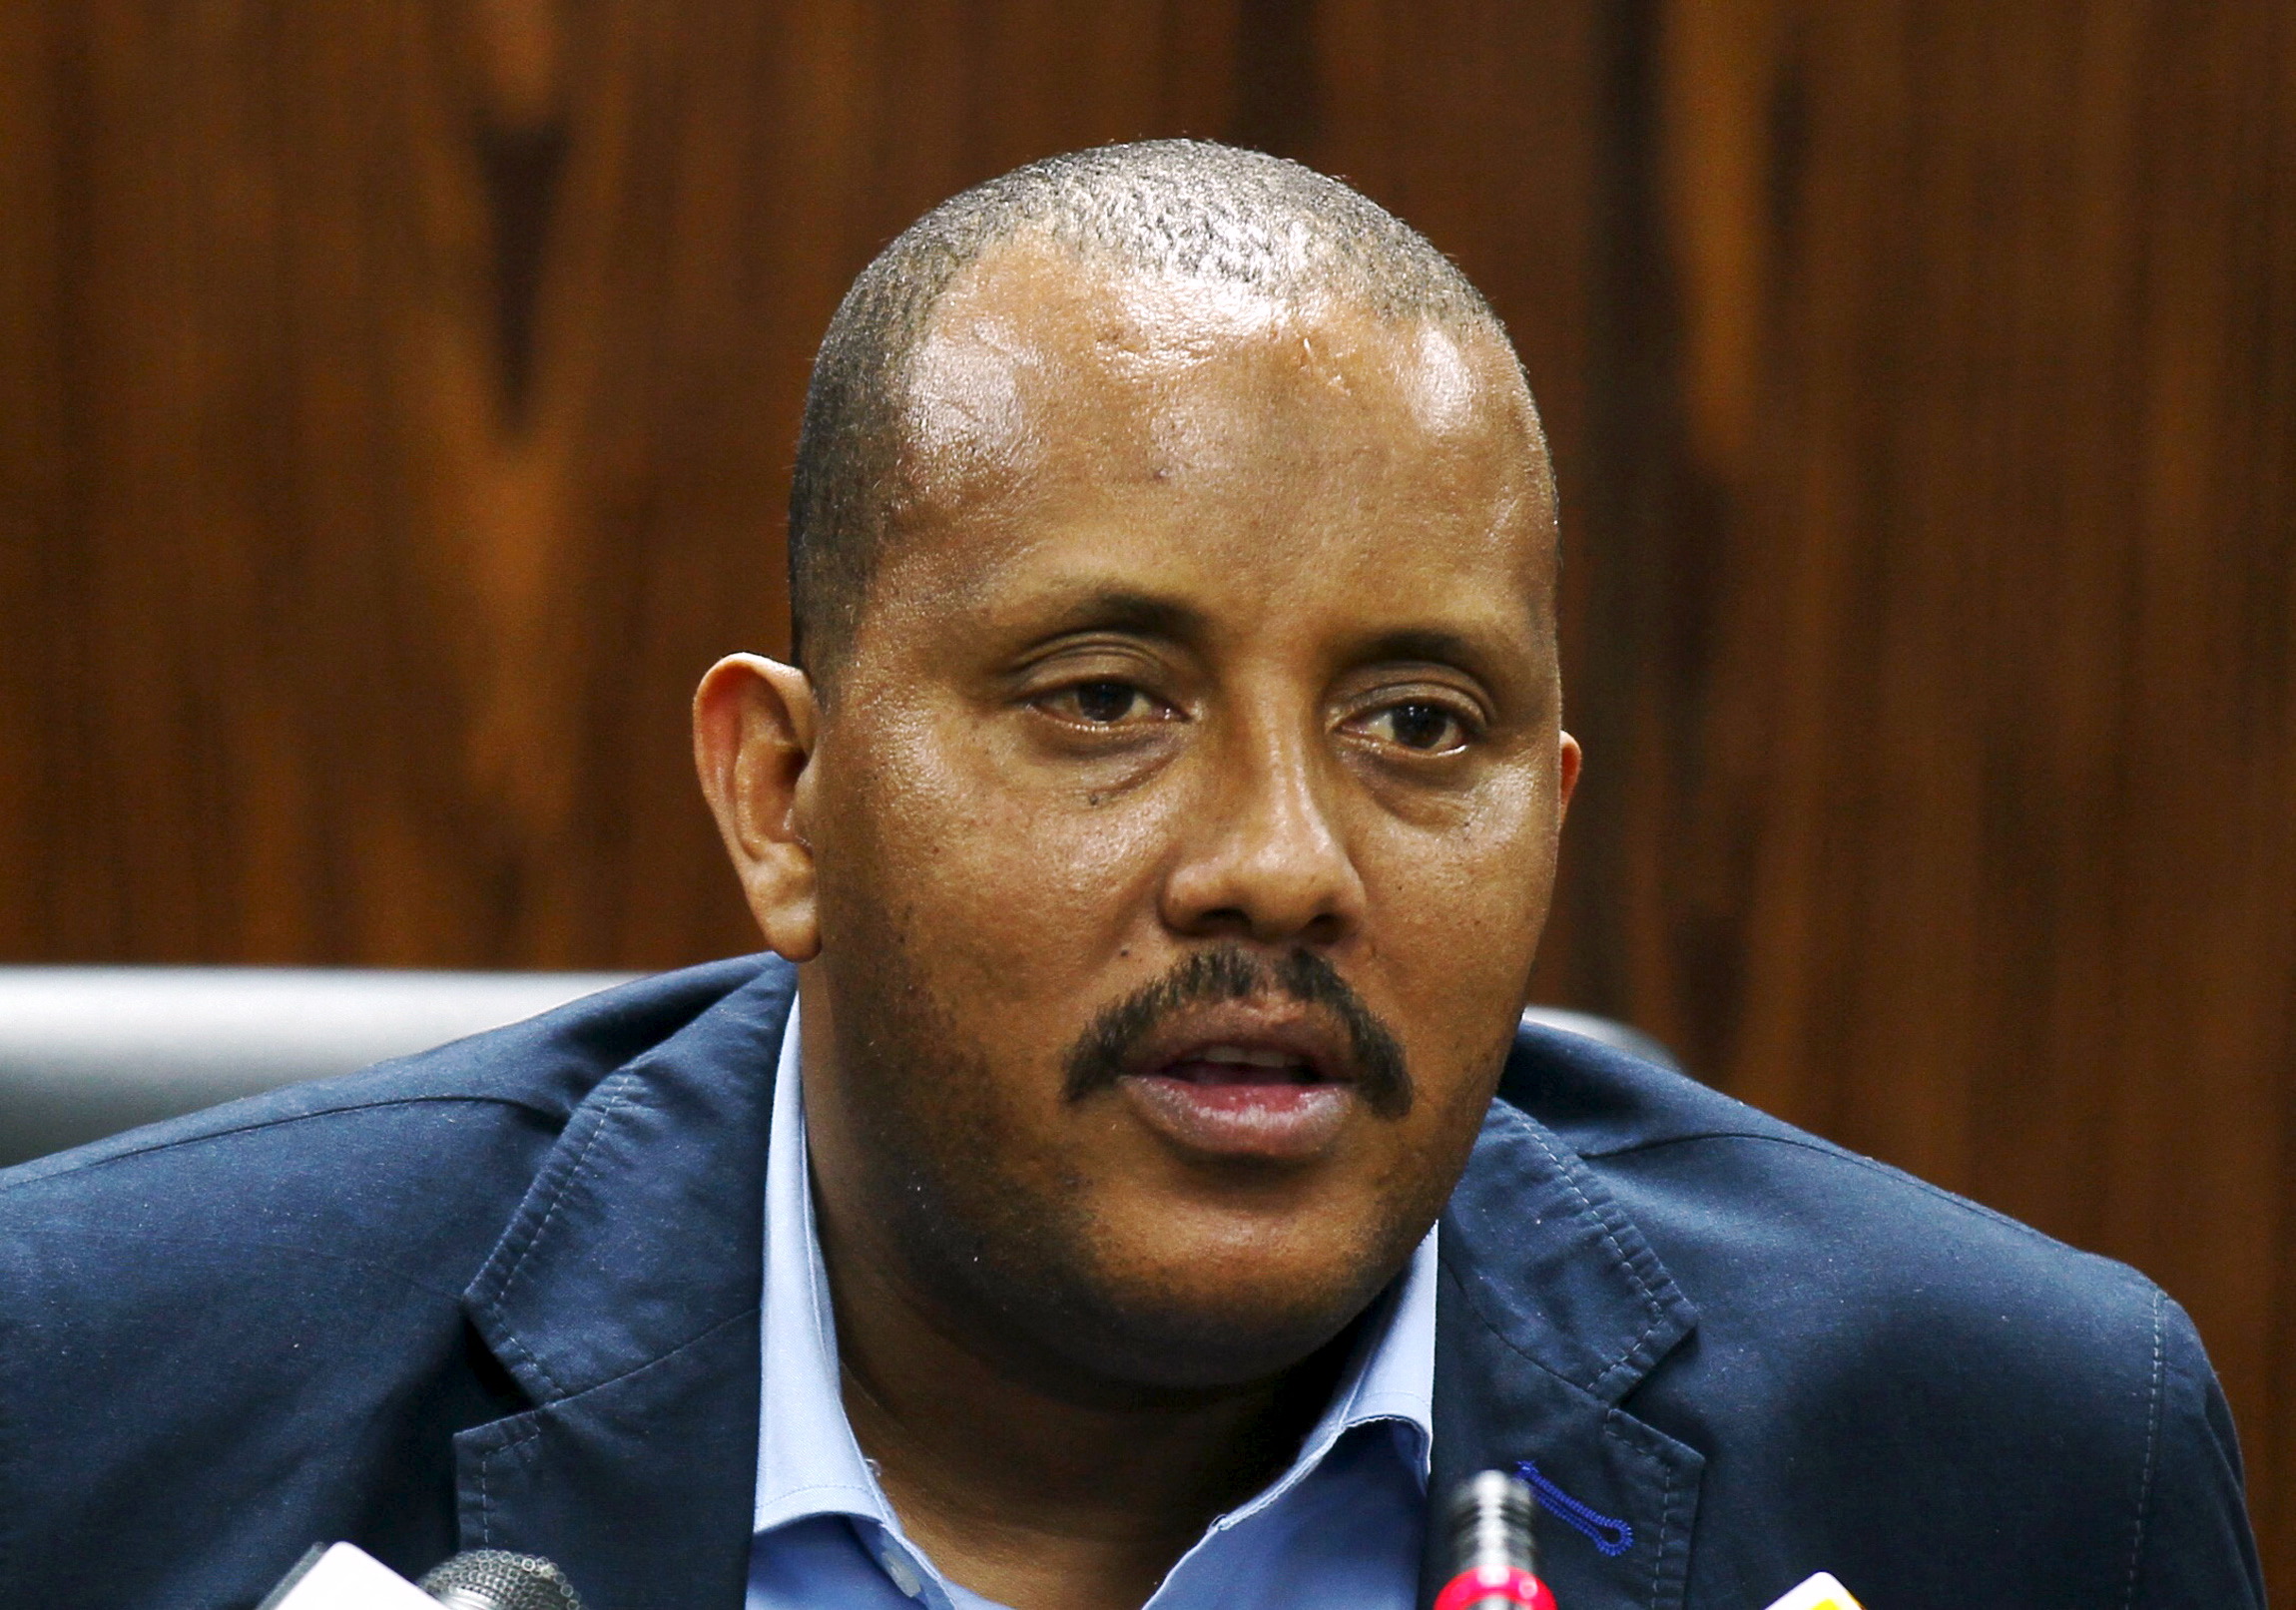 Ethiopia's Government Communications Affairs Office Minister, Getachew Reda addresses a news conference on the violent protests that have been taking place in the Oromia Region from last November in Ethiopia